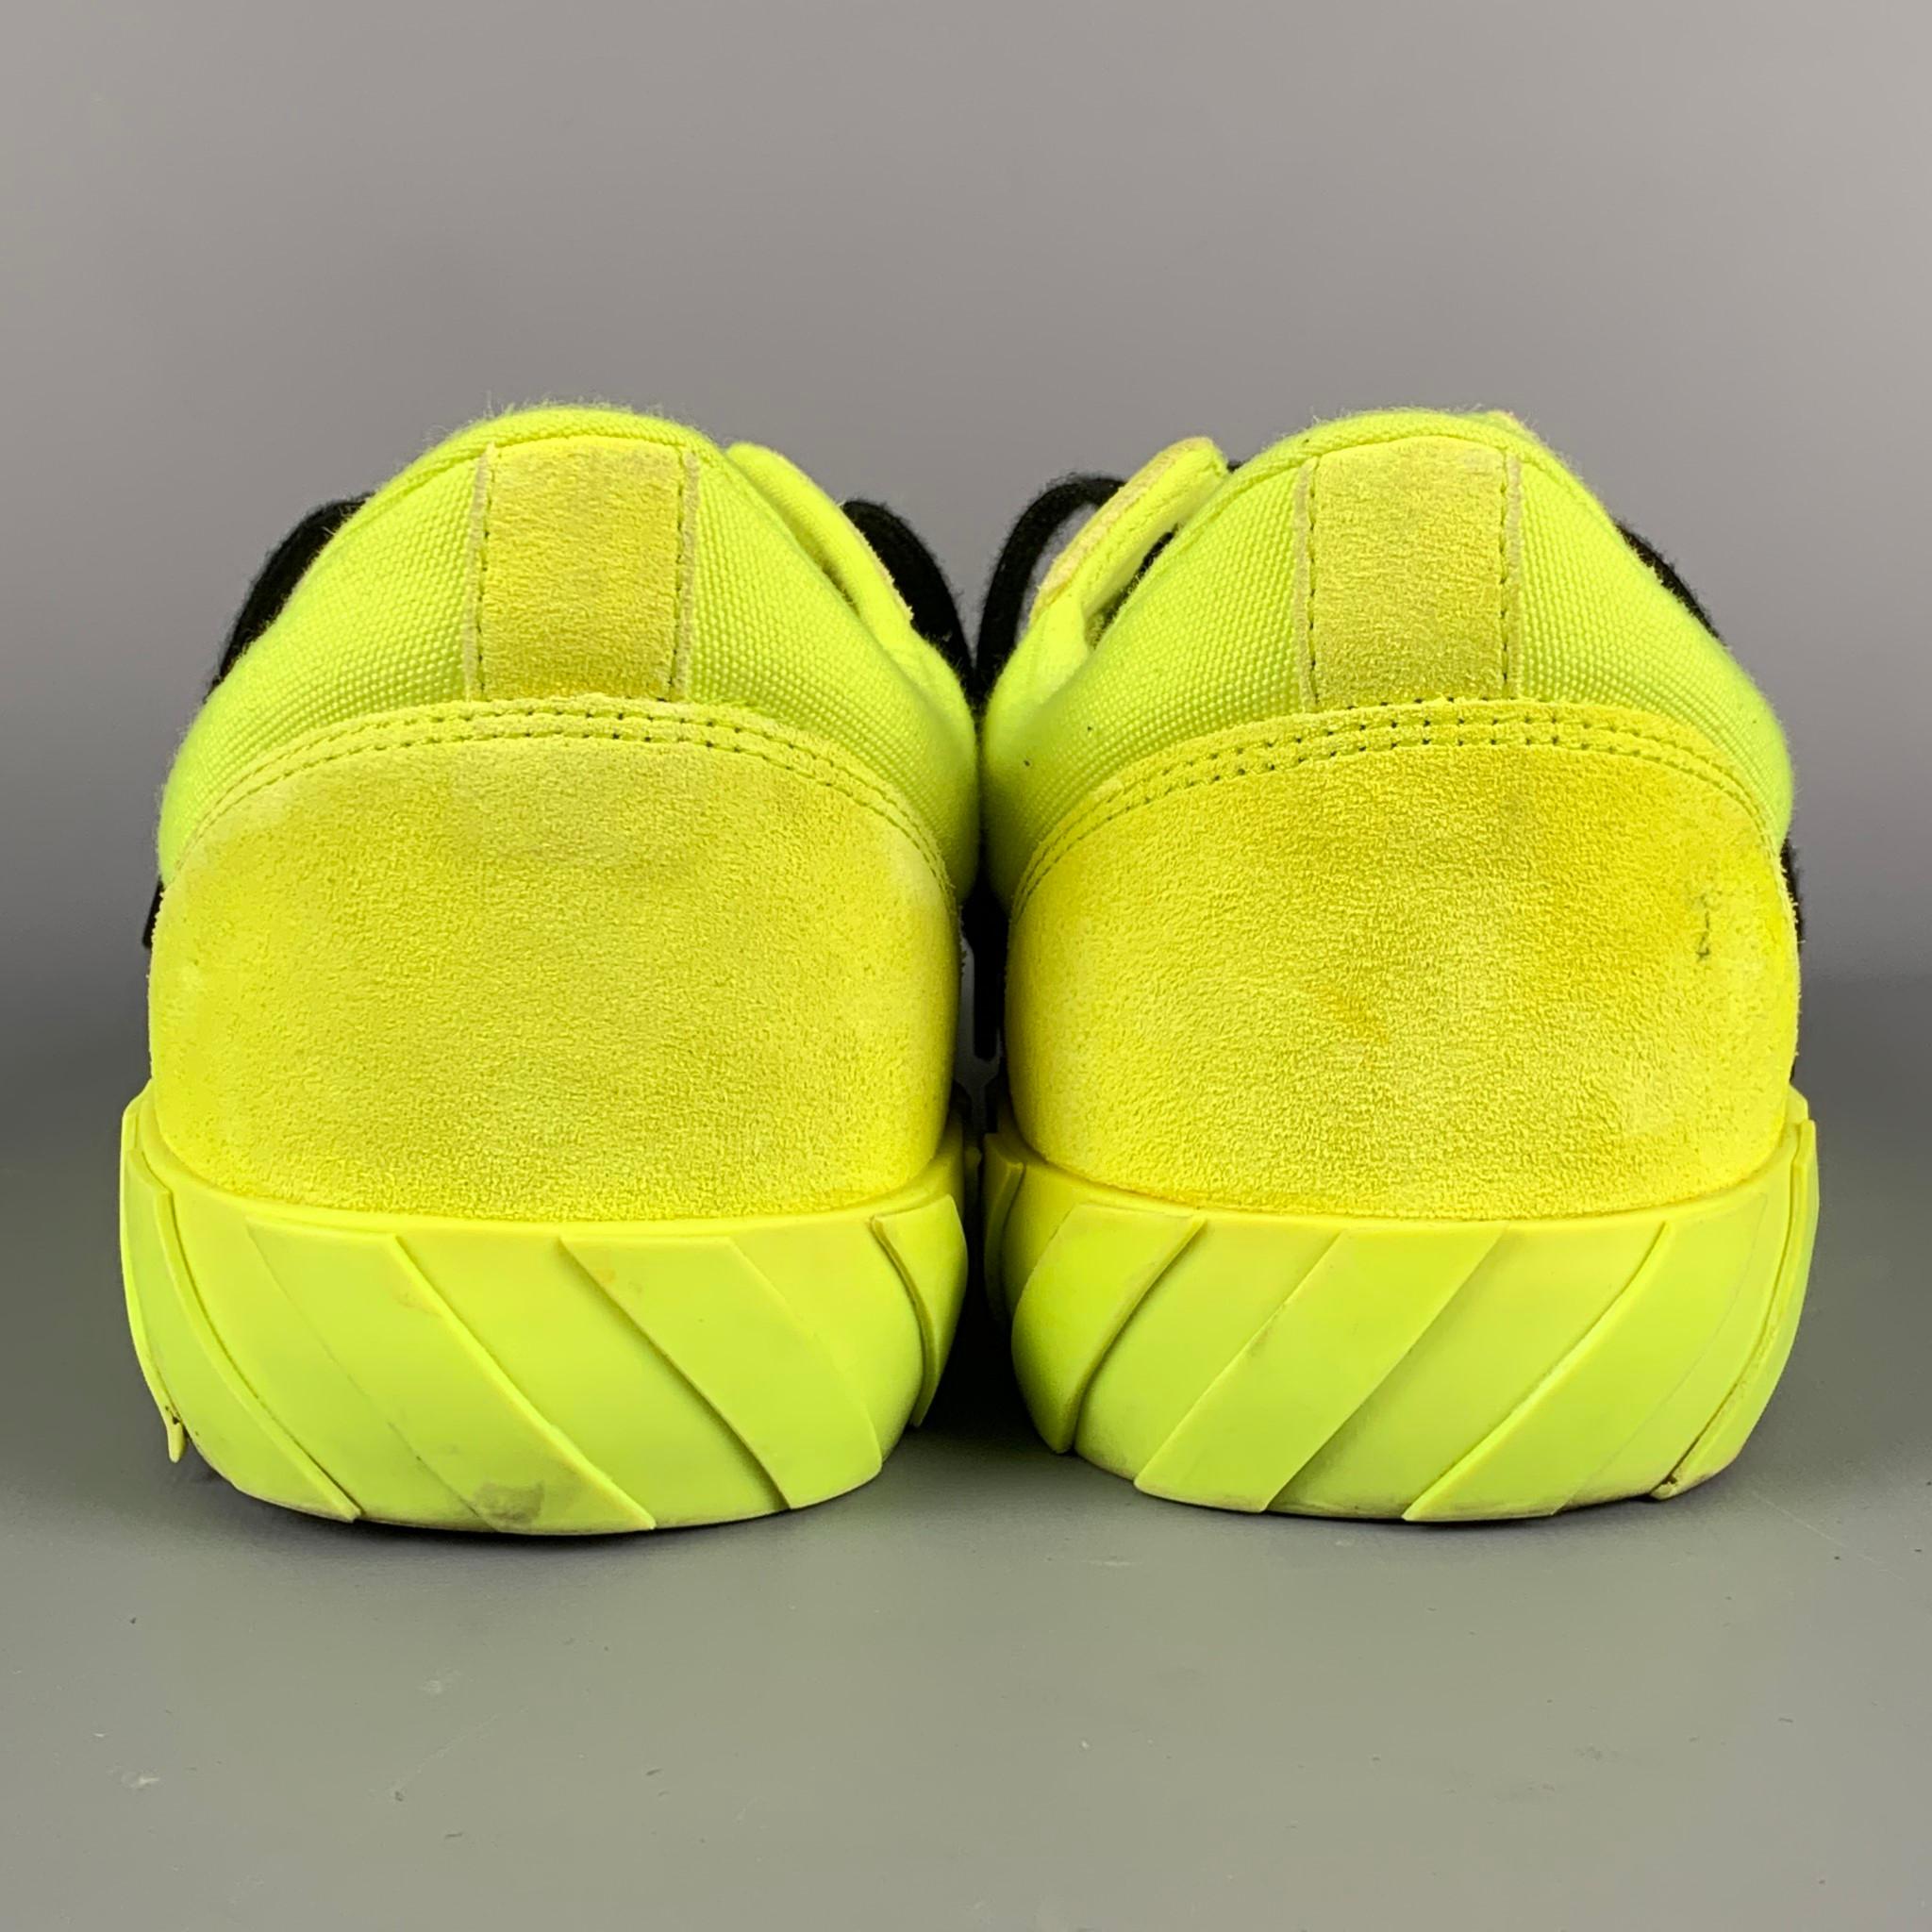 off white yellow sneakers